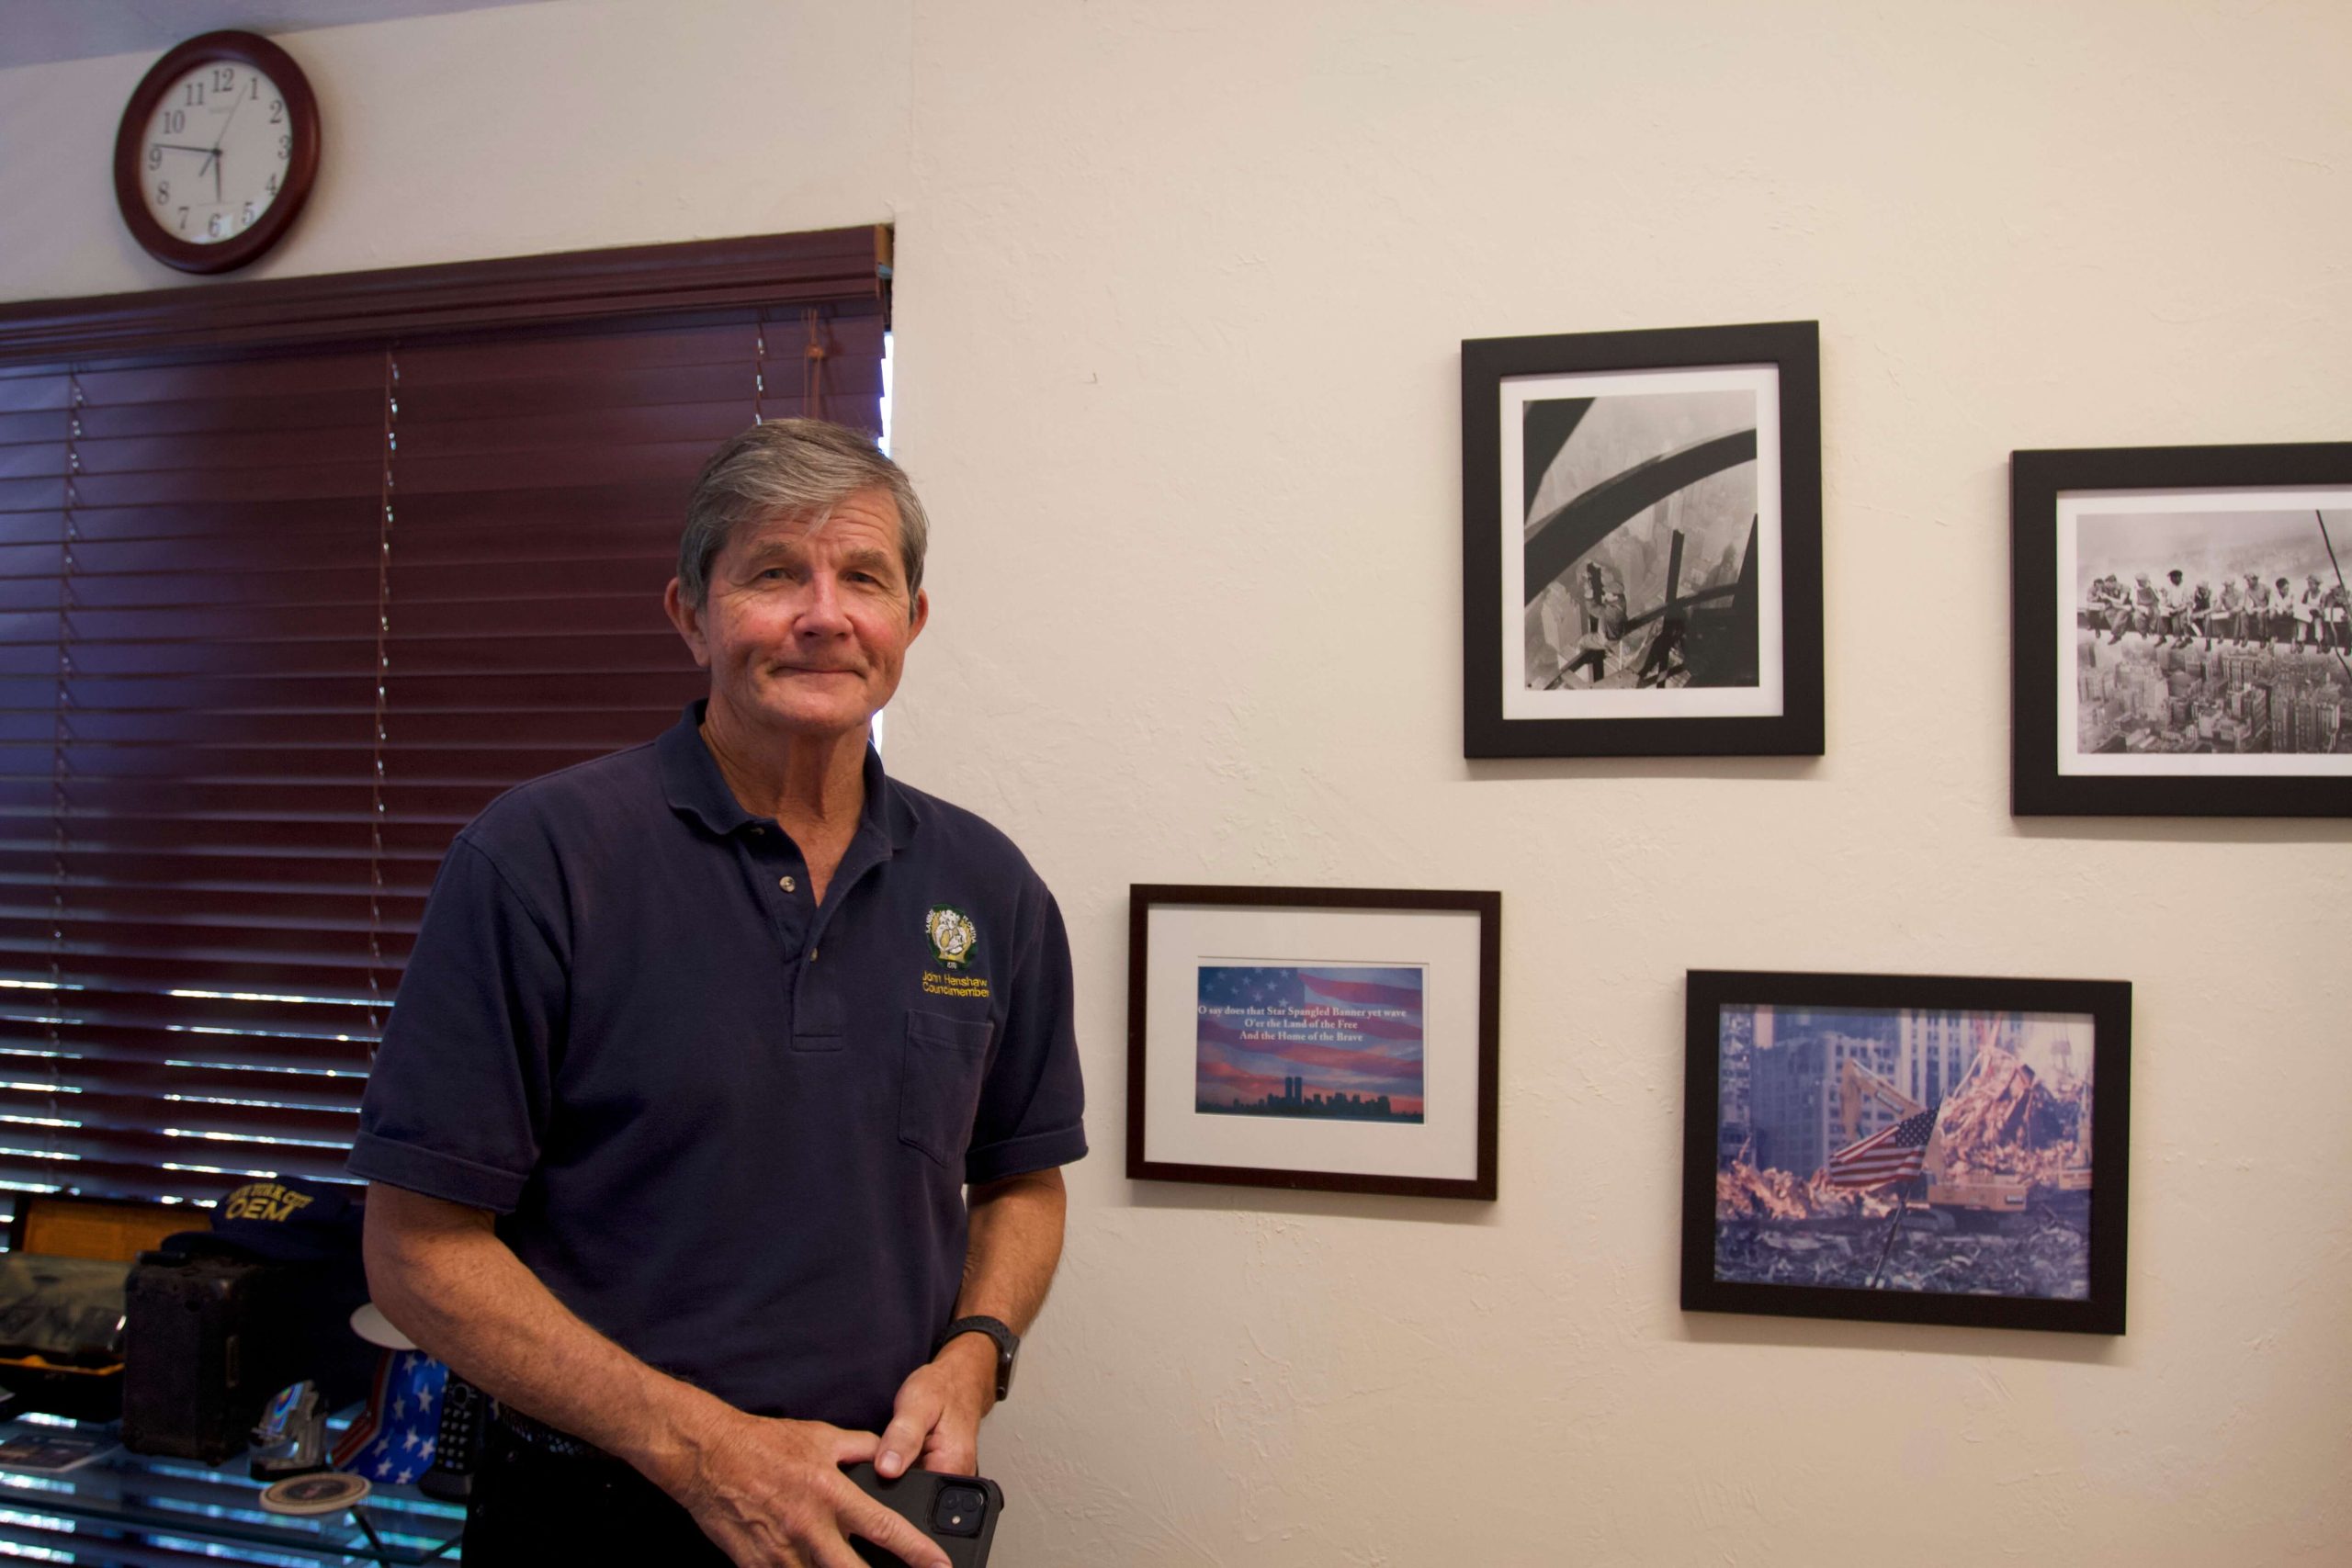 John Henshaw stands next to a photo gallery of 9/11 photos on the wall. (Janelle Retka / Columbia Journalism Investigations)